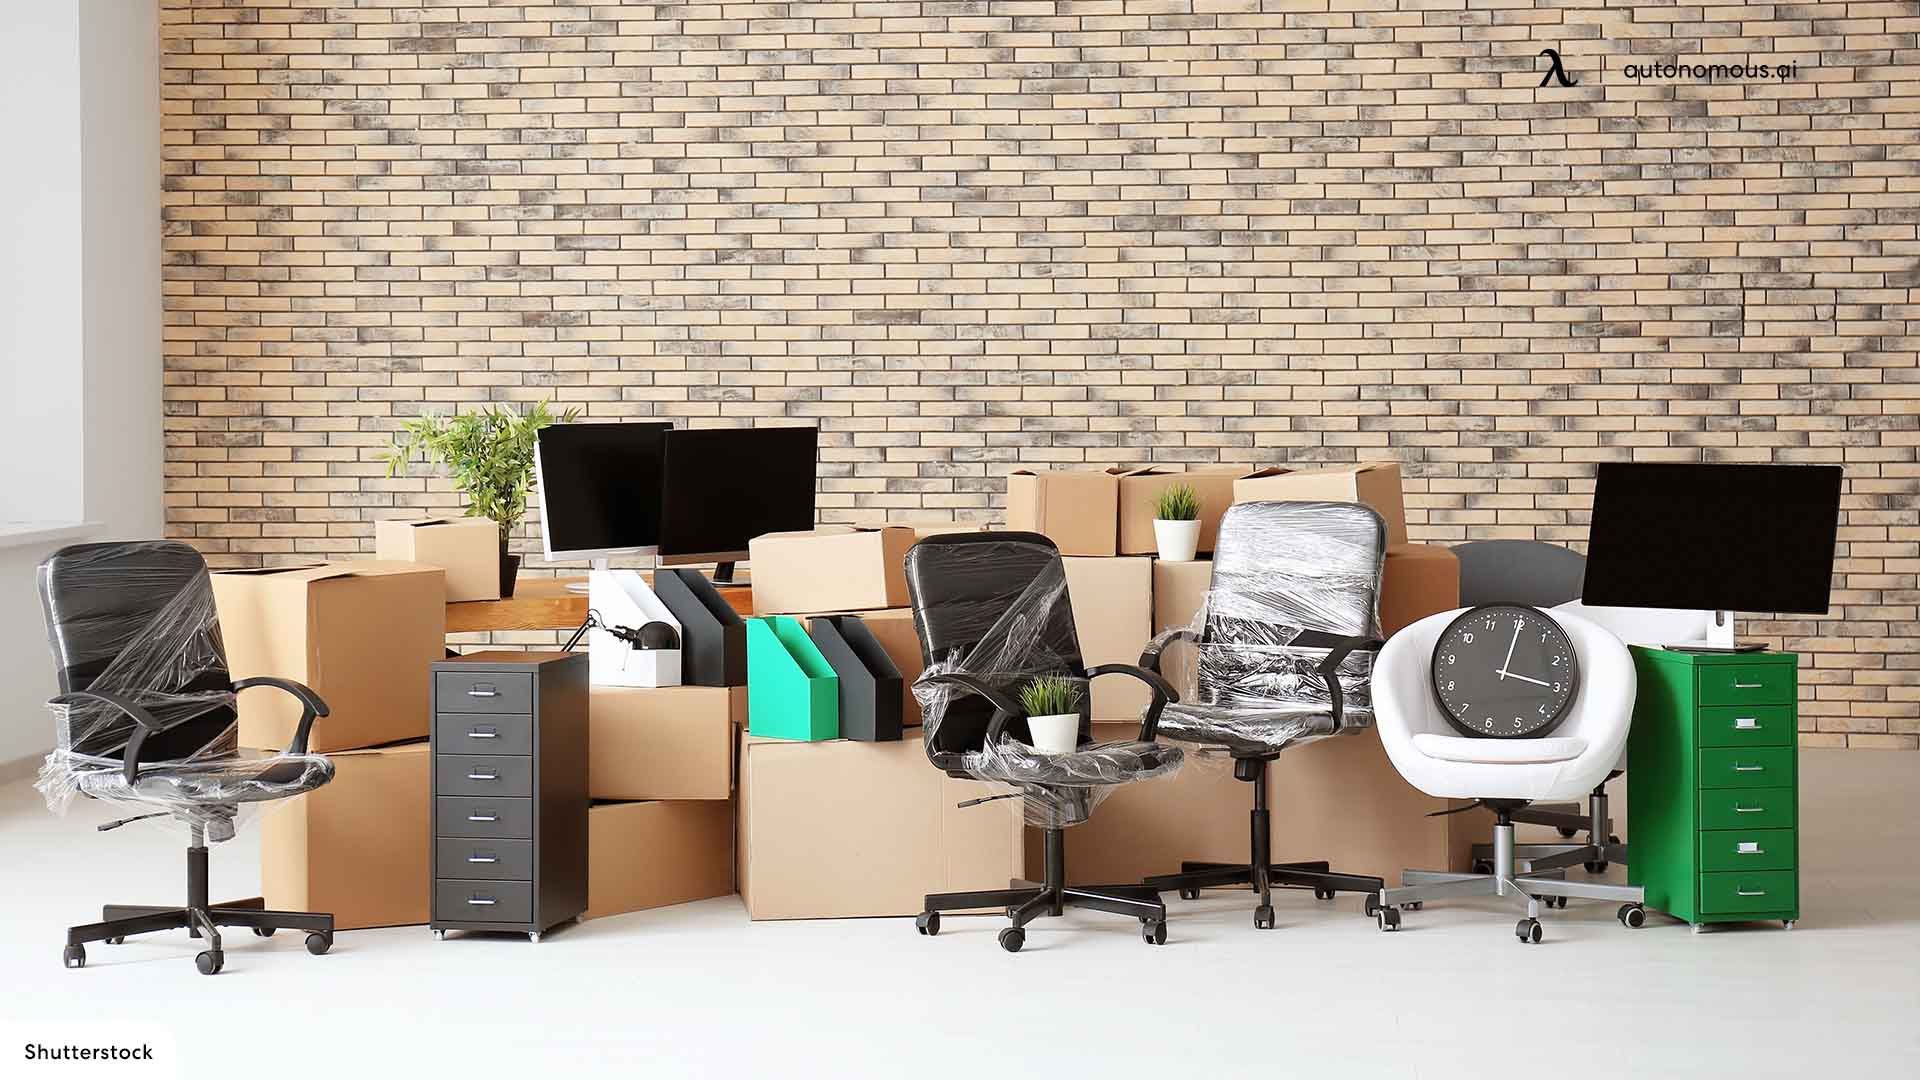 How to Minimize Disruption While Relocating Offices